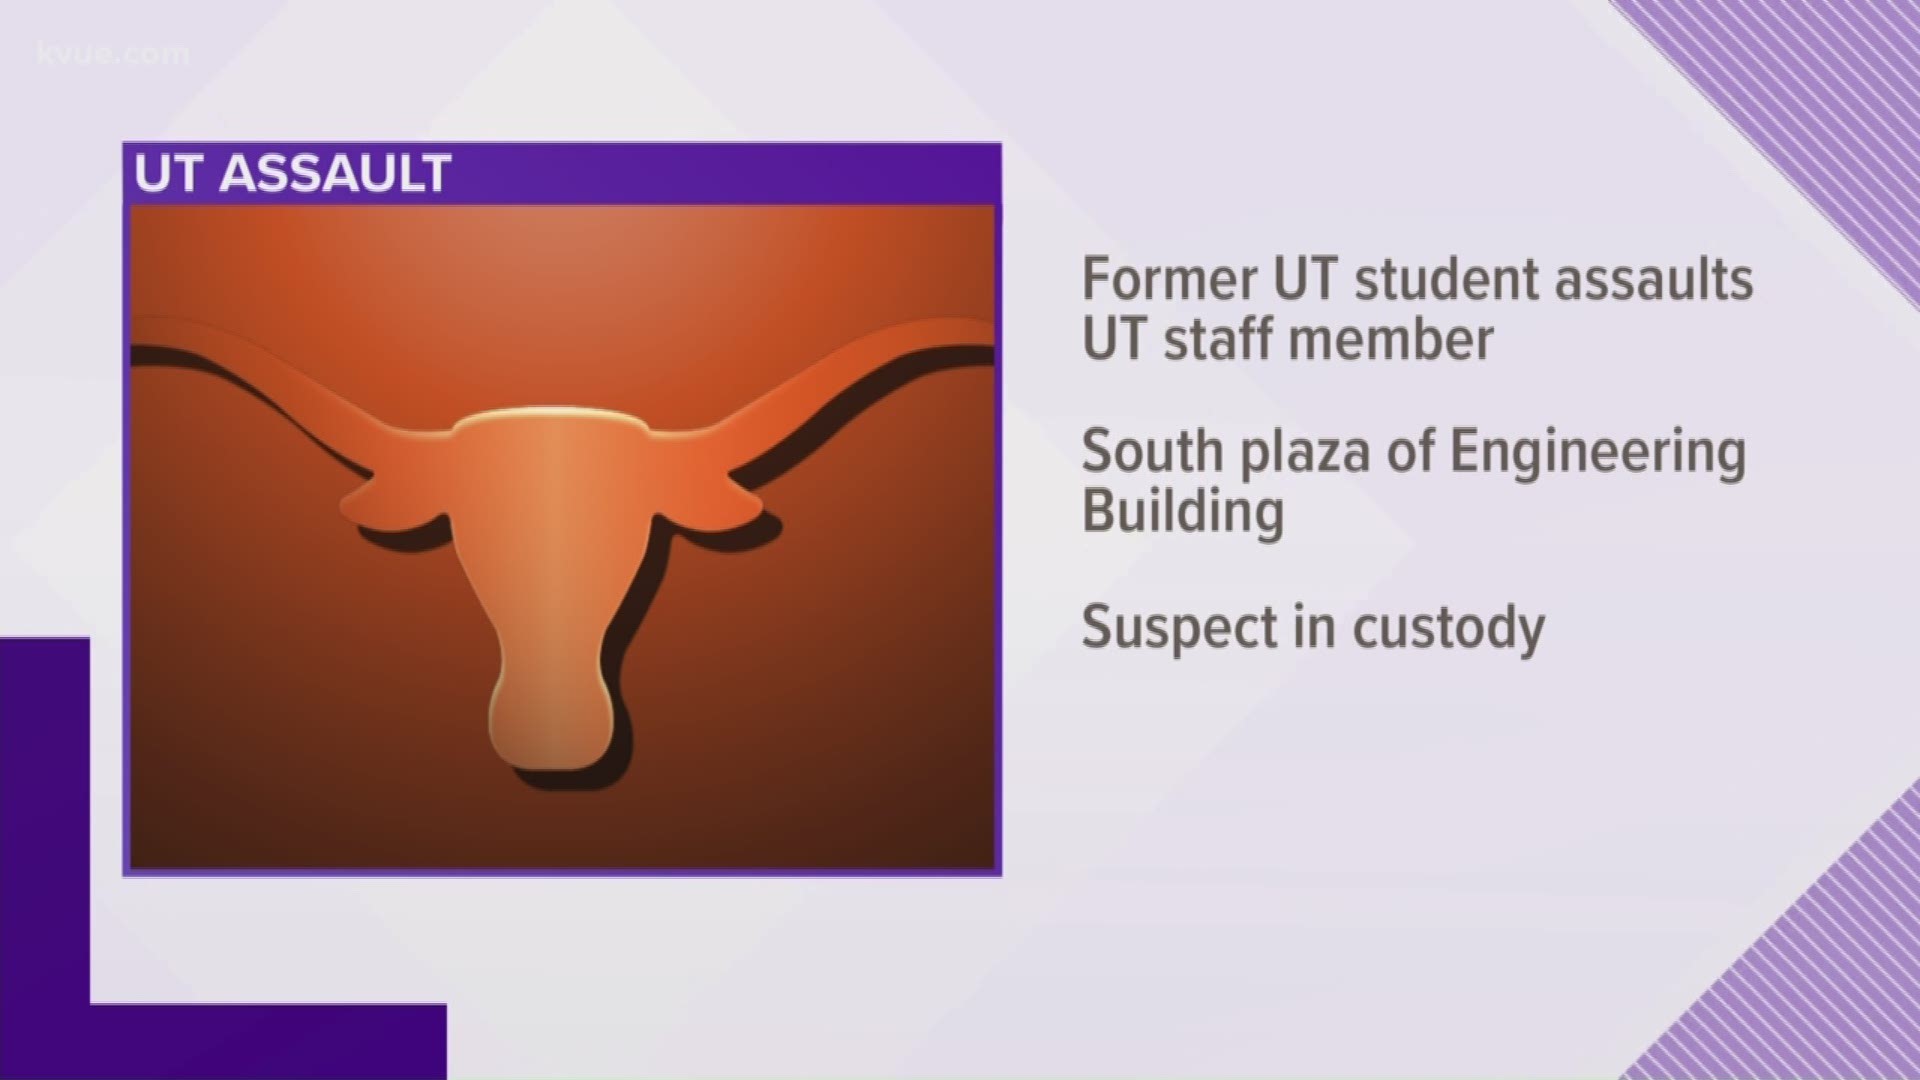 UTPD is investigation an alleged assault against a staff member at the chemical petroleum engineering building.